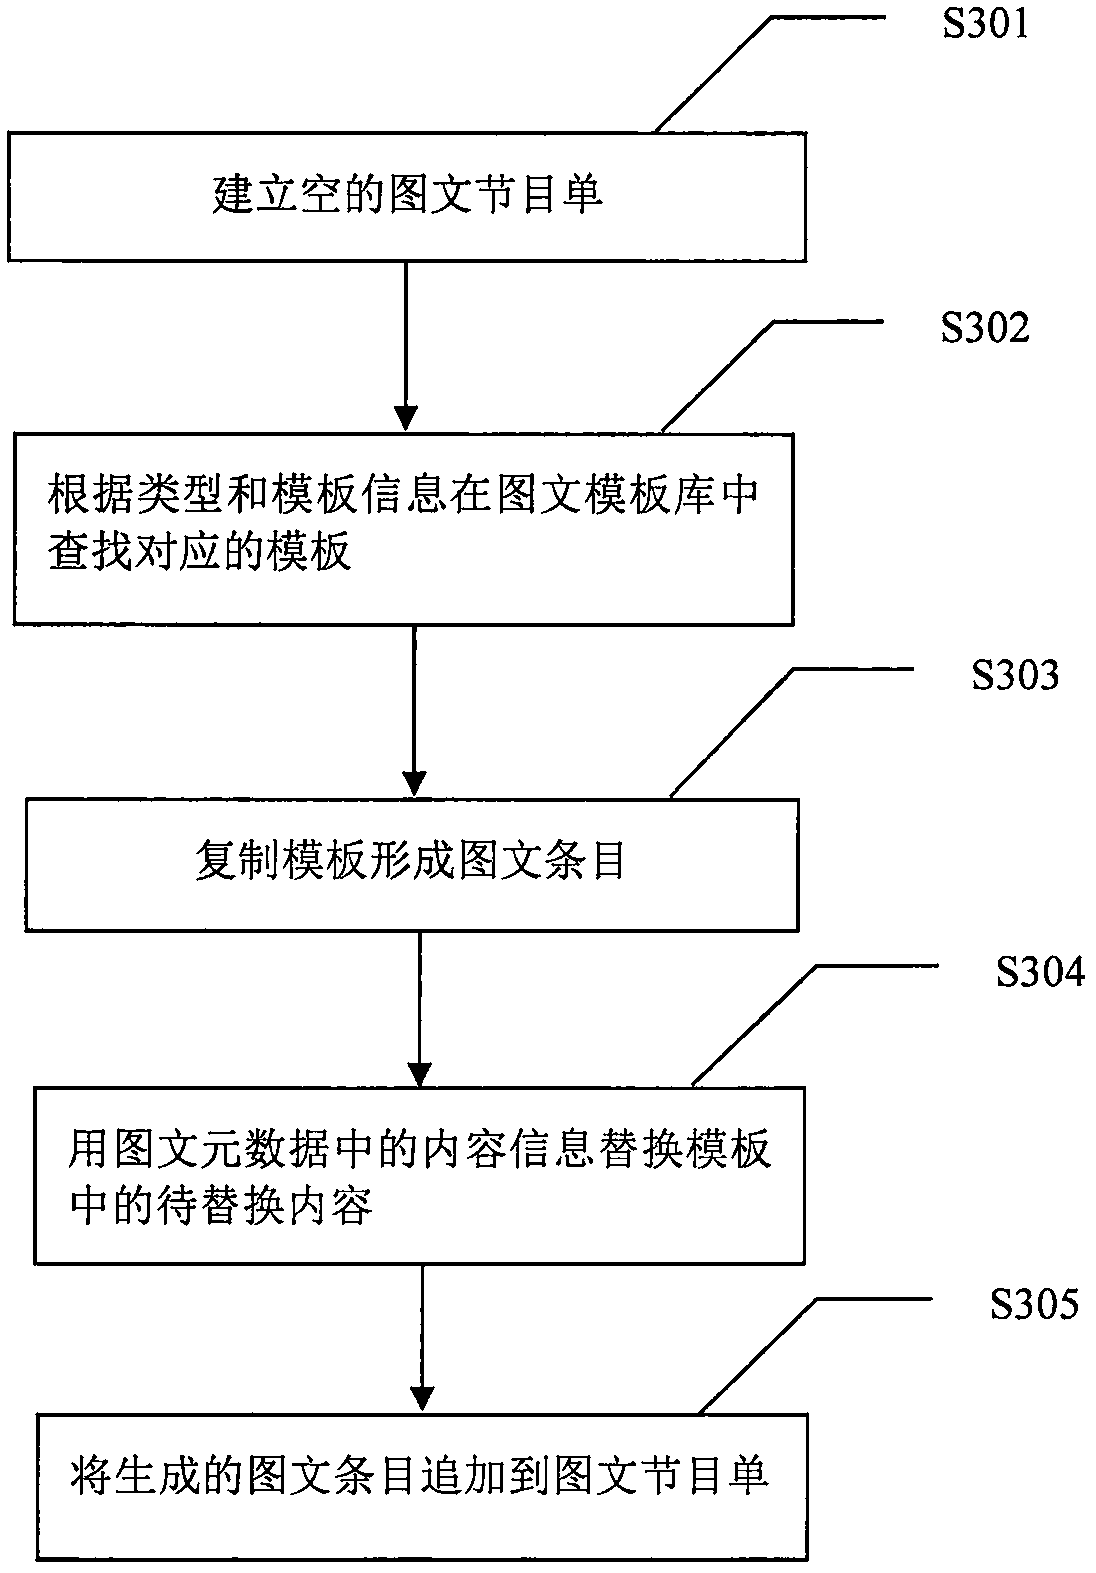 Method for automatic generation and adjustment of an image-text program list